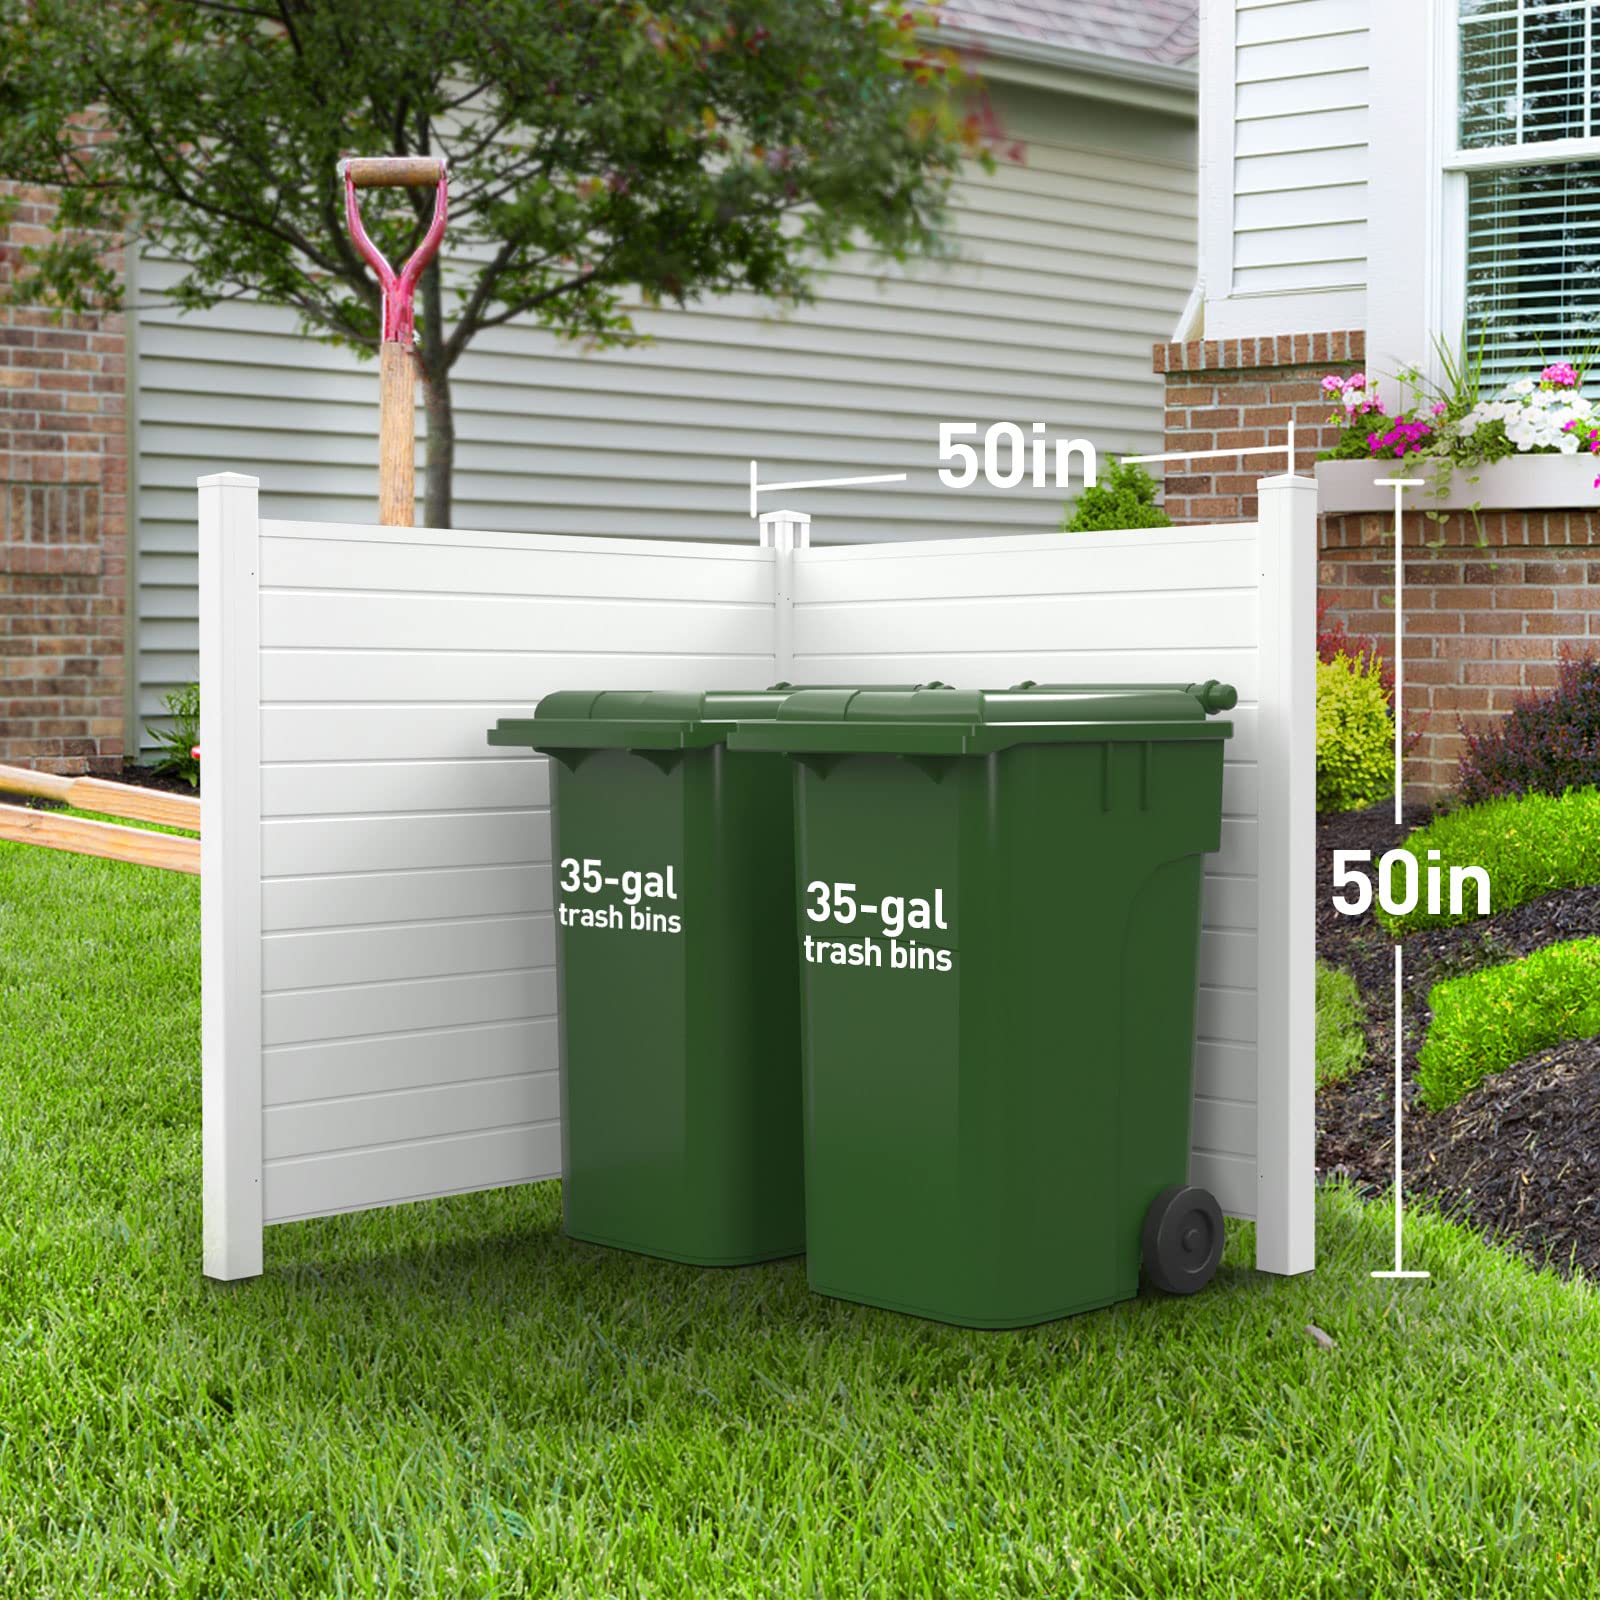 Caprihom Air Conditioner Fence Trash Can Screen Fence 50"W X 50"H Pool Equipment Fence Enclosure Vinyl Privacy Fence Panel Outdoor Privacy Screens Kit (2-Pack)